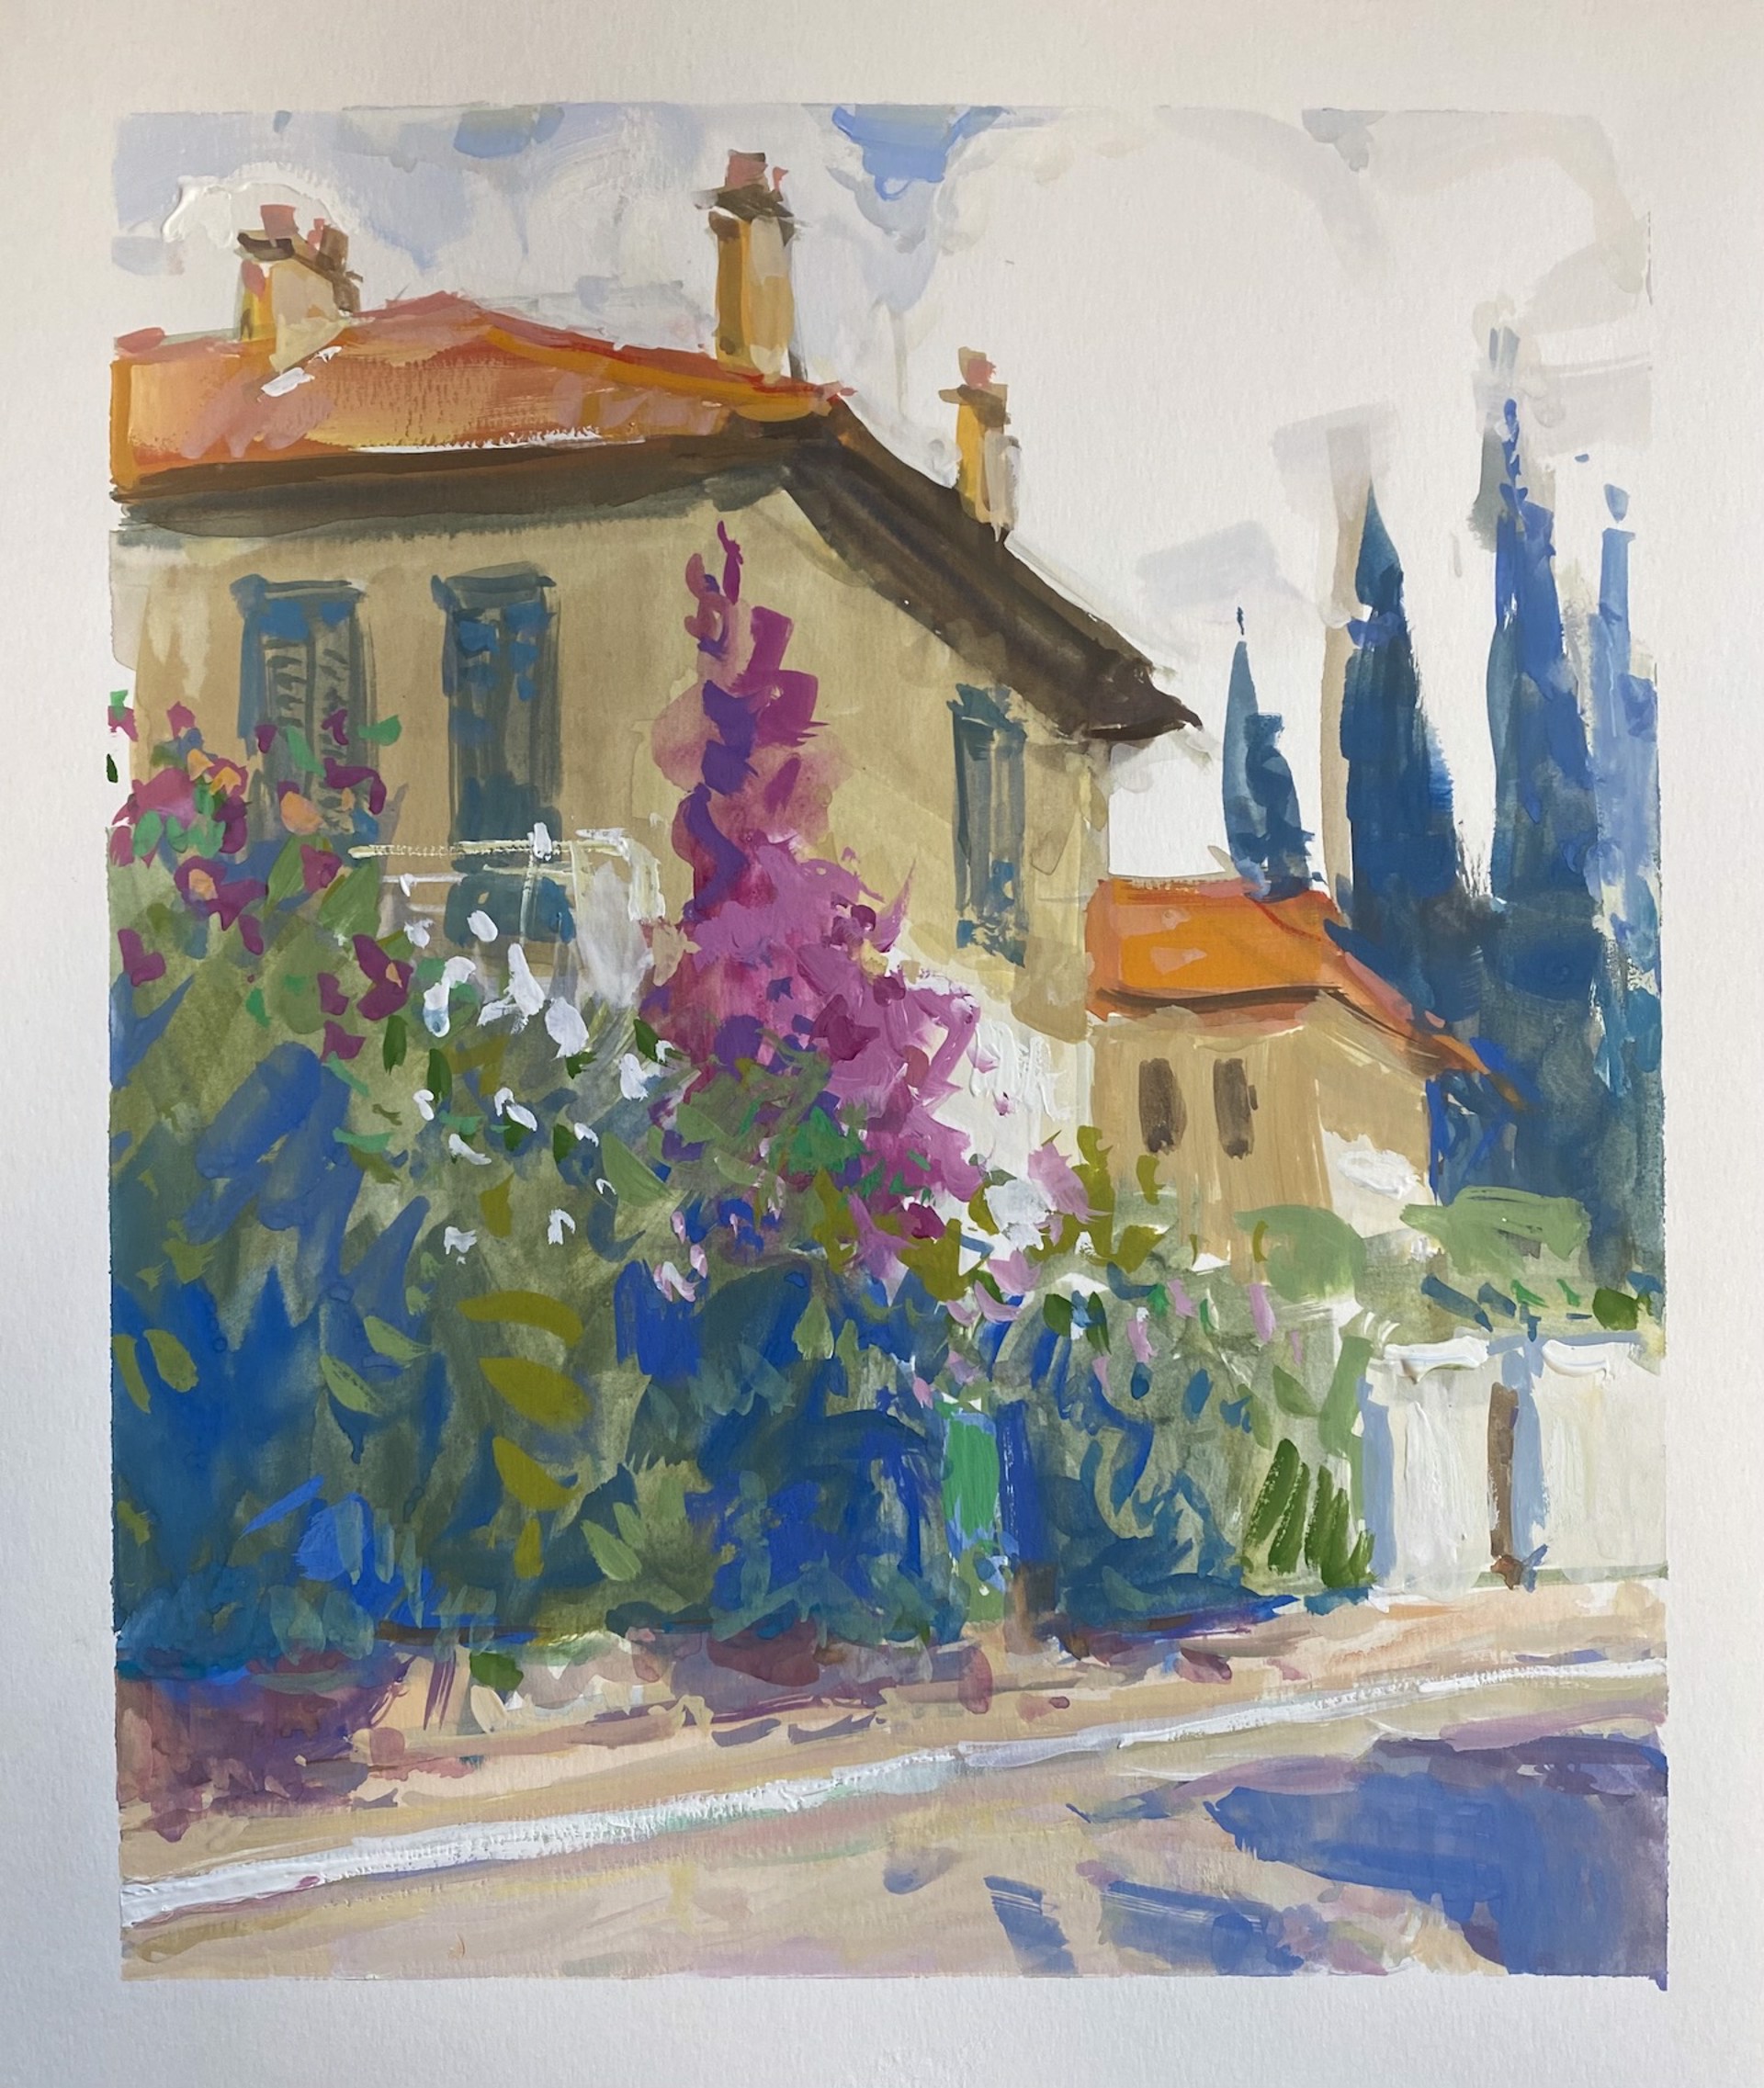 French Bougainvillea by Richard Oversmith